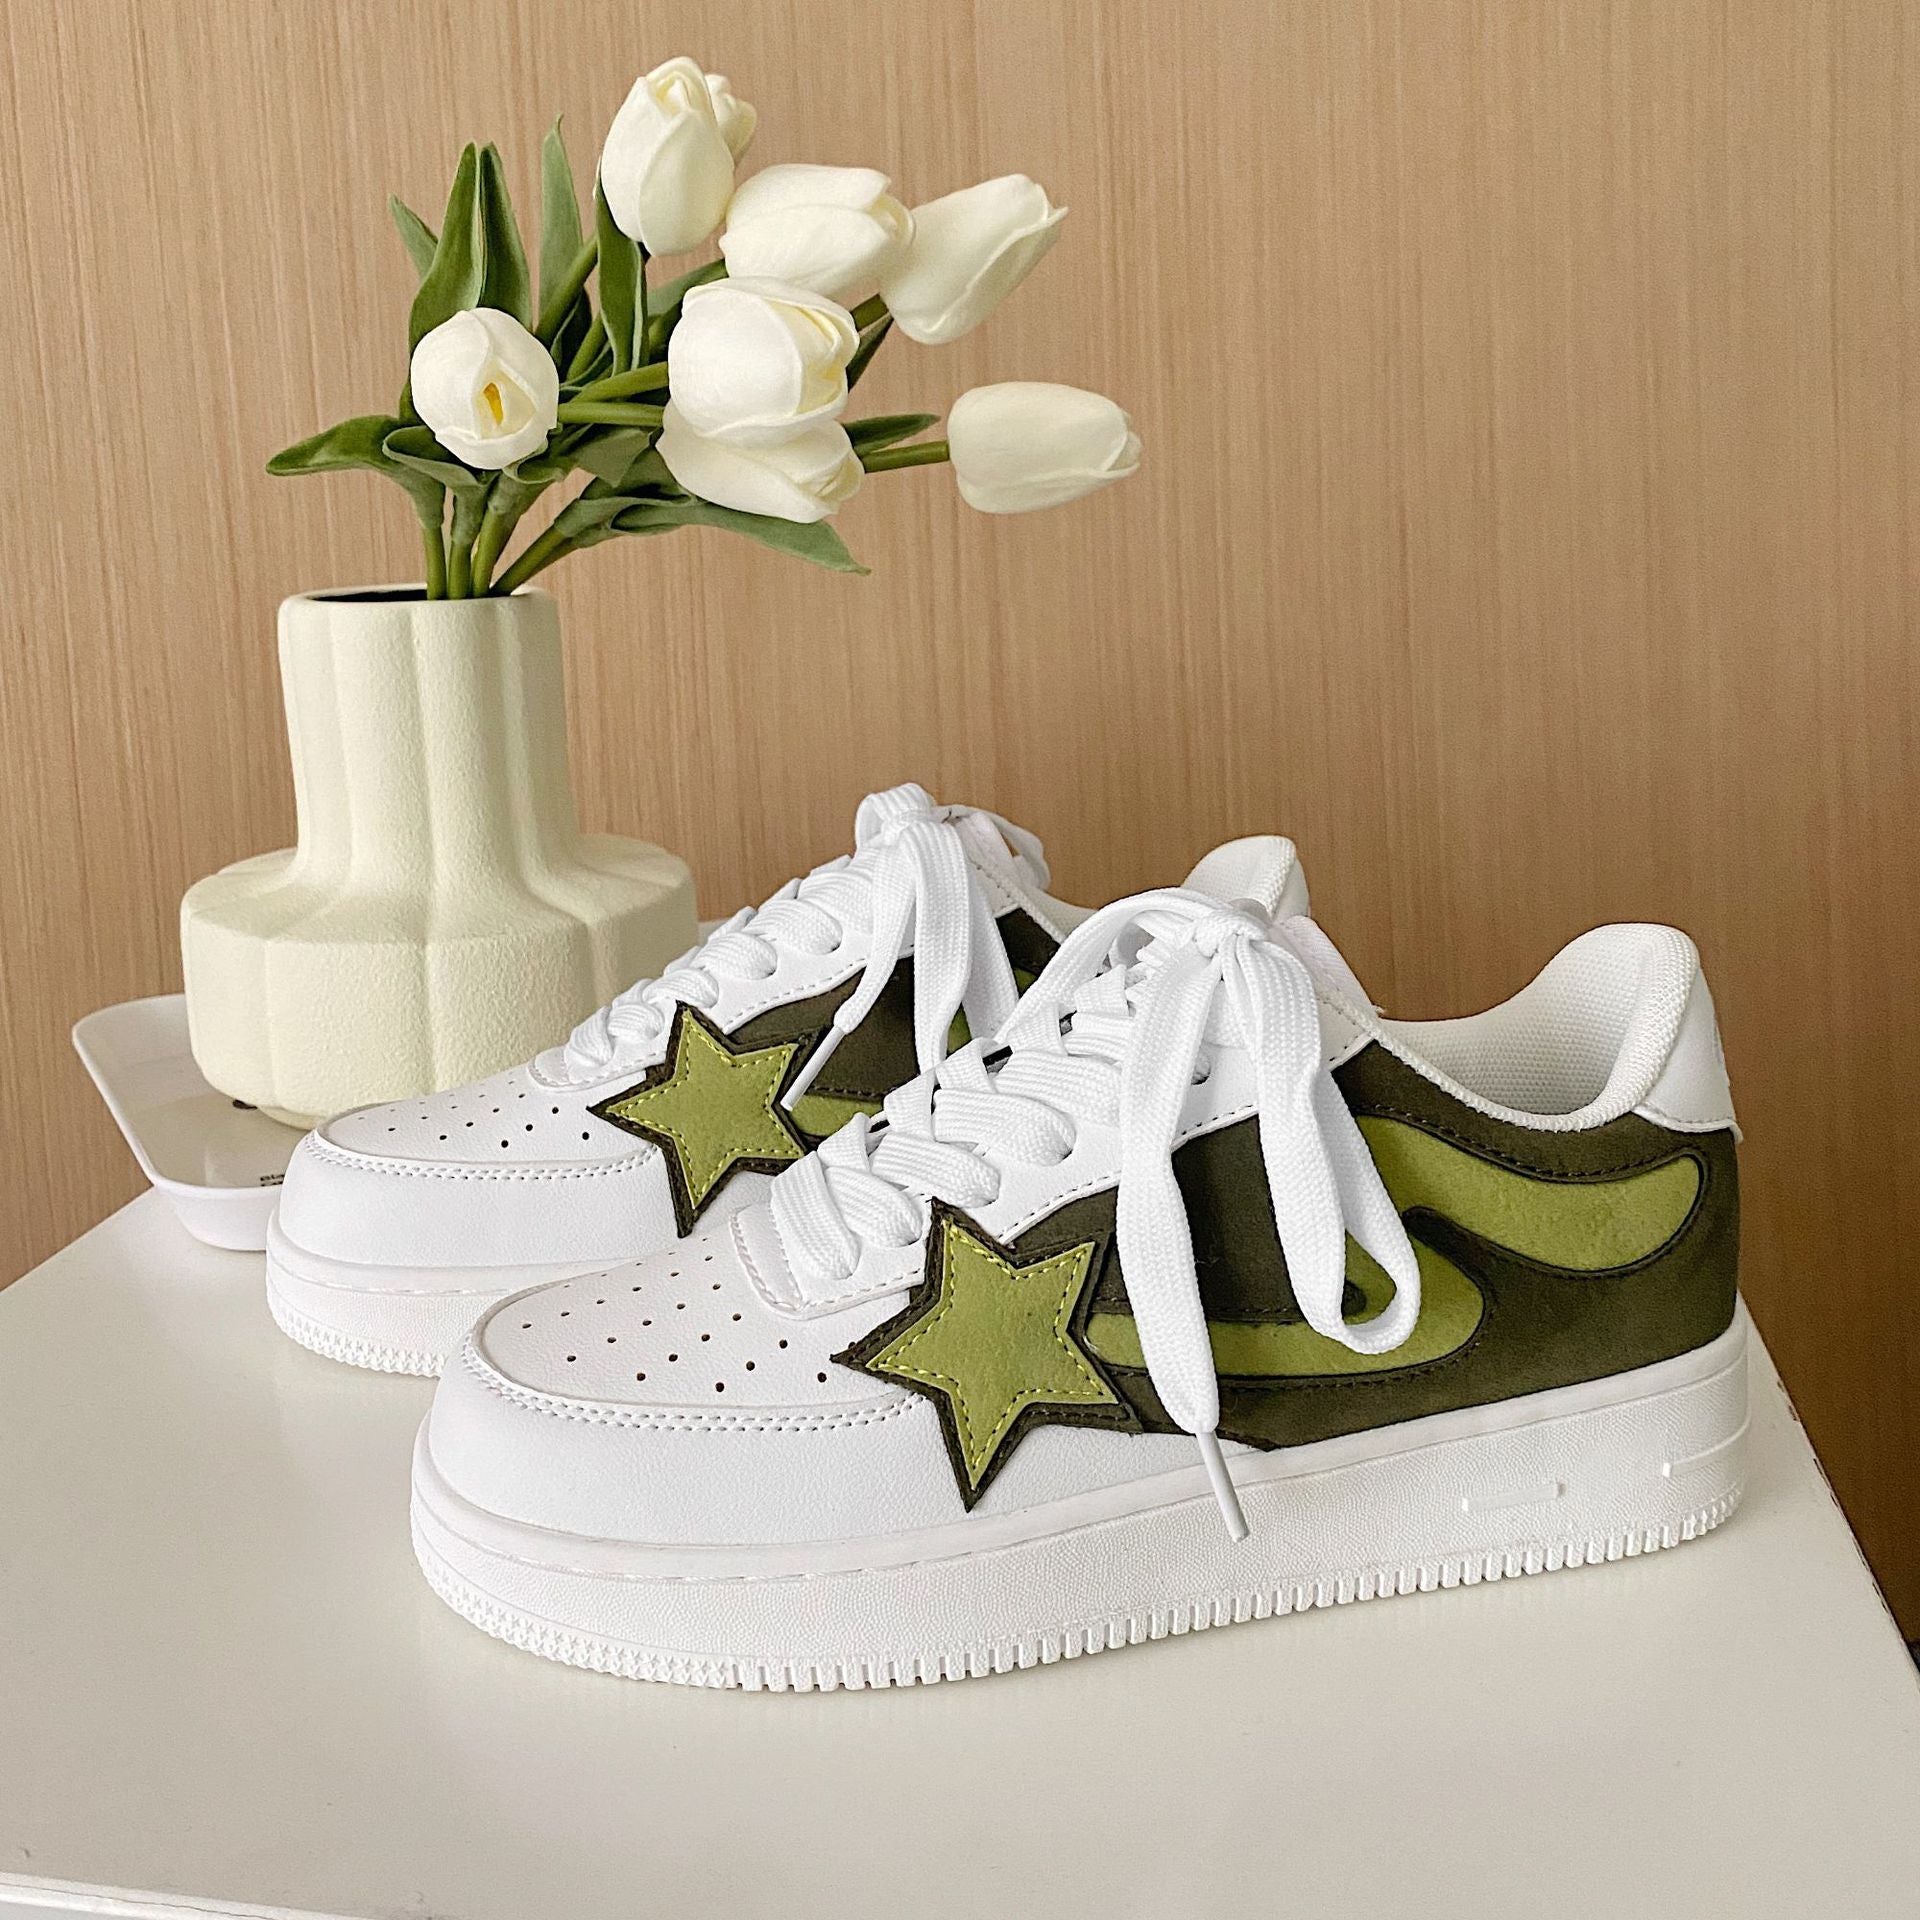 The Supermade American Star Element Thick Bottom Couple Sneakers